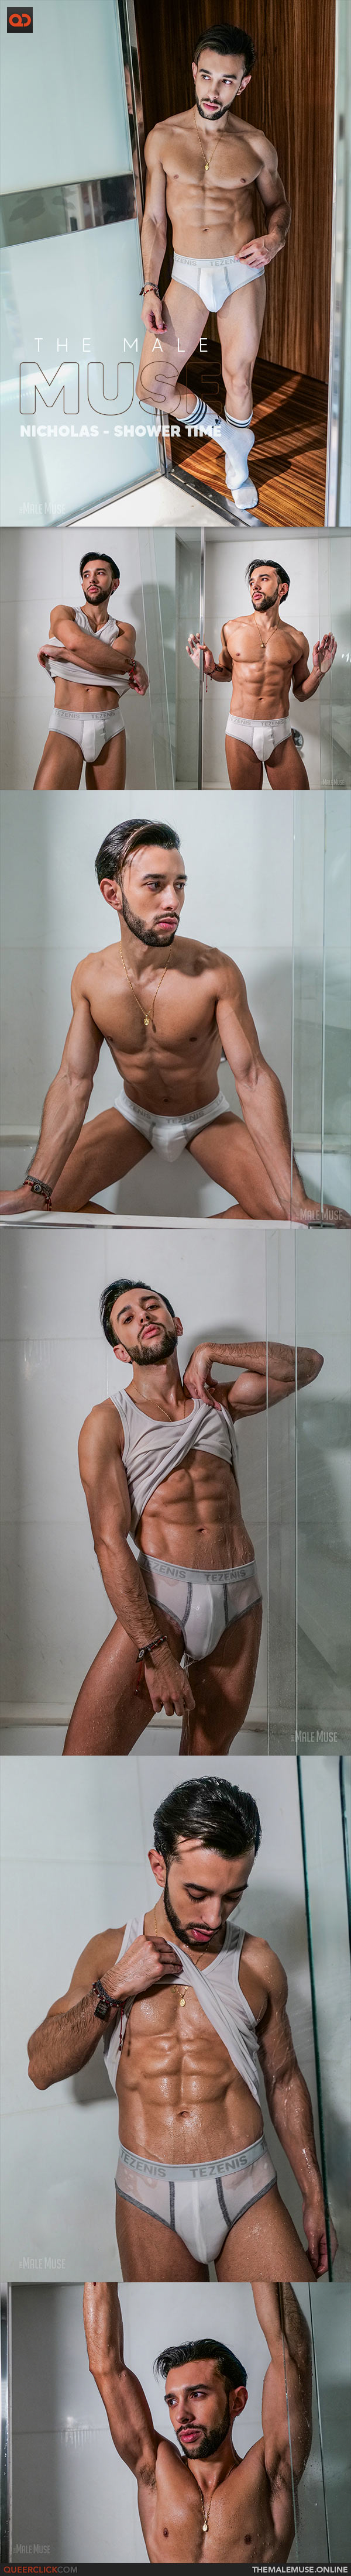 The Male Muse: Nicholas - Shower Time